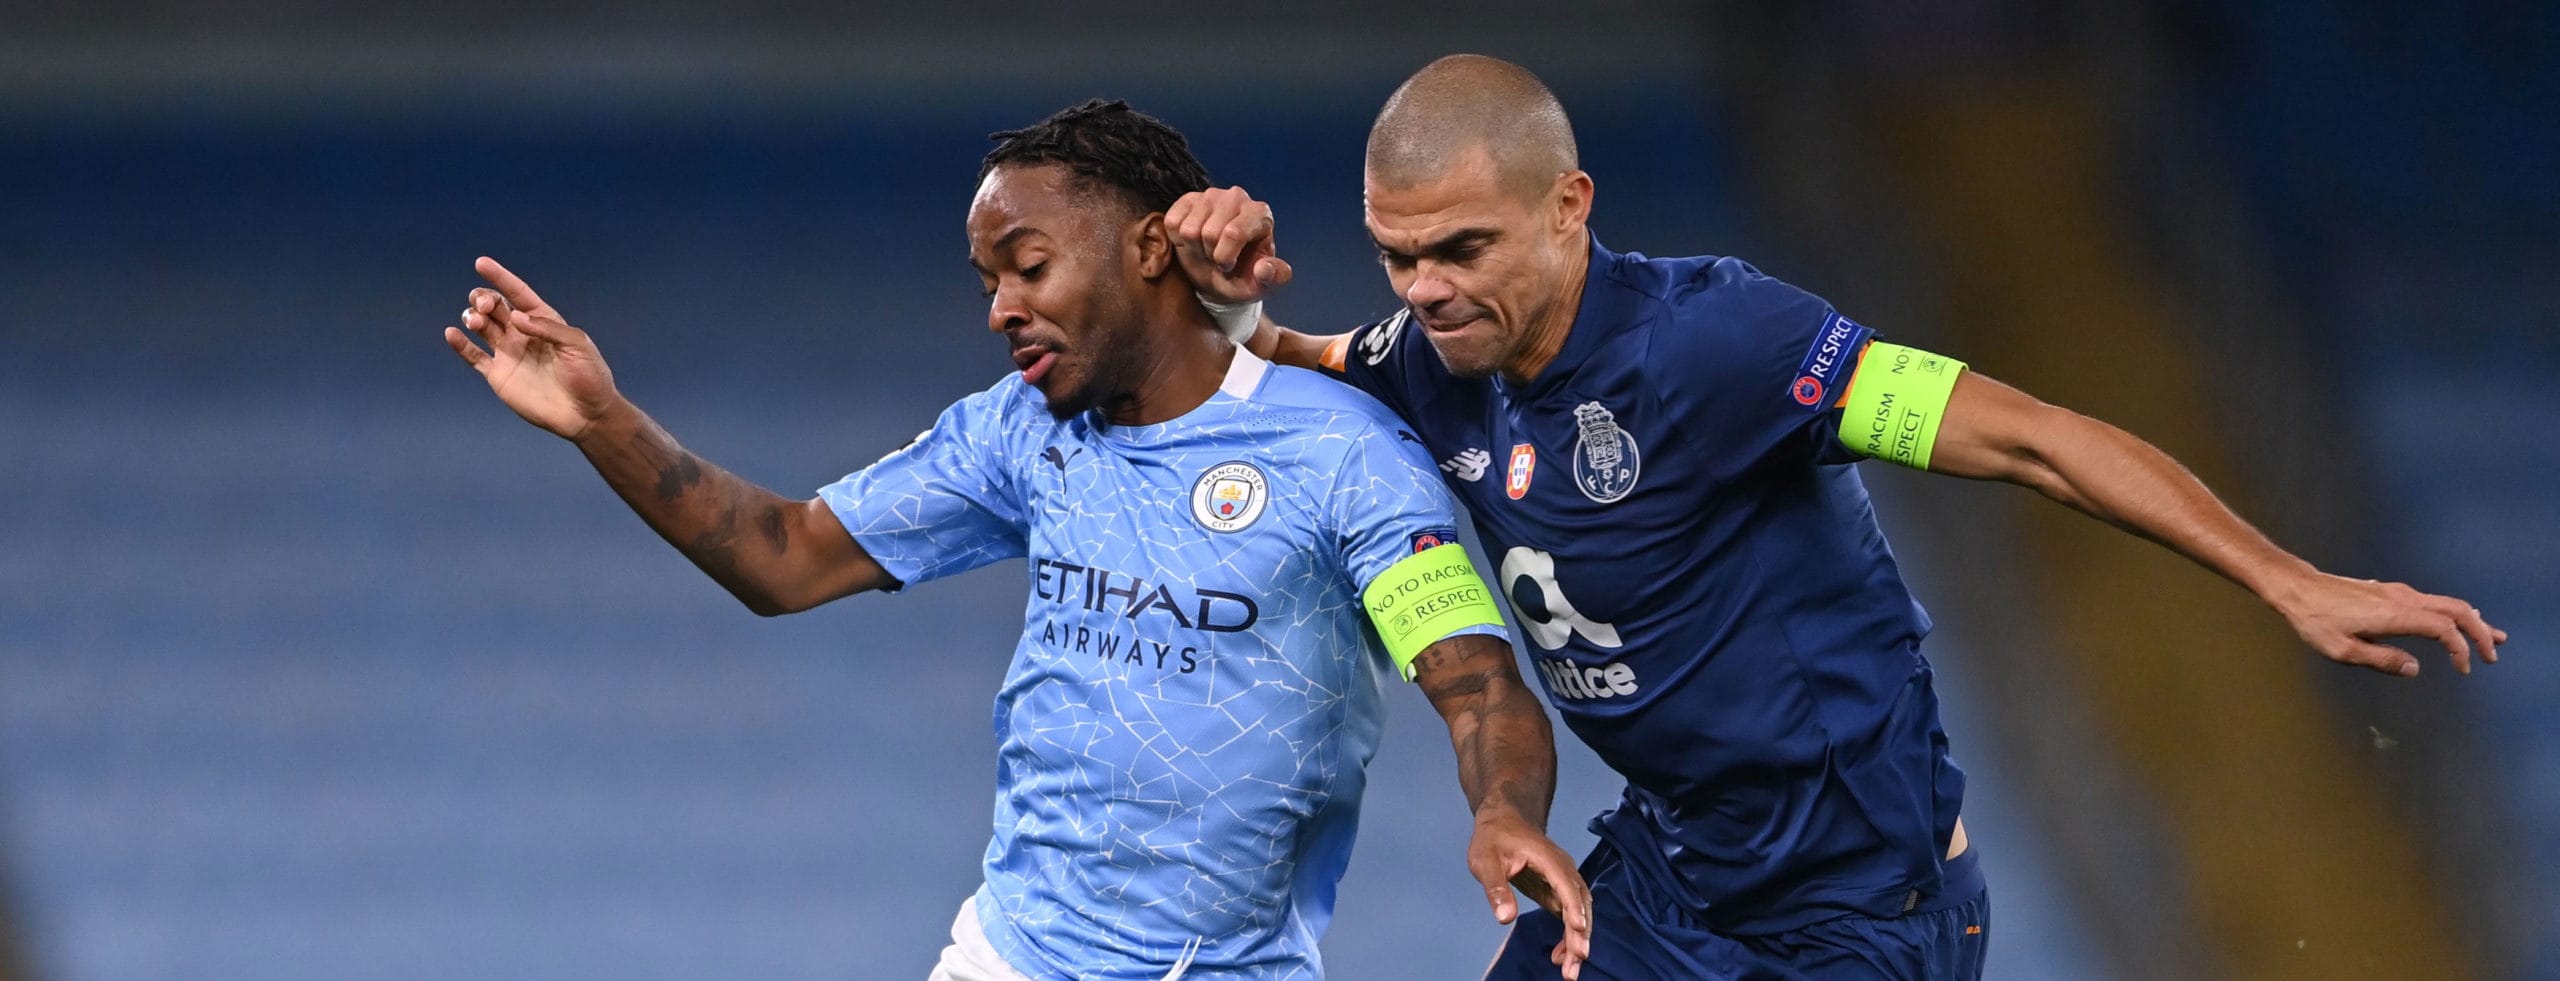 Porto vs Man City: Draw would suit both sides